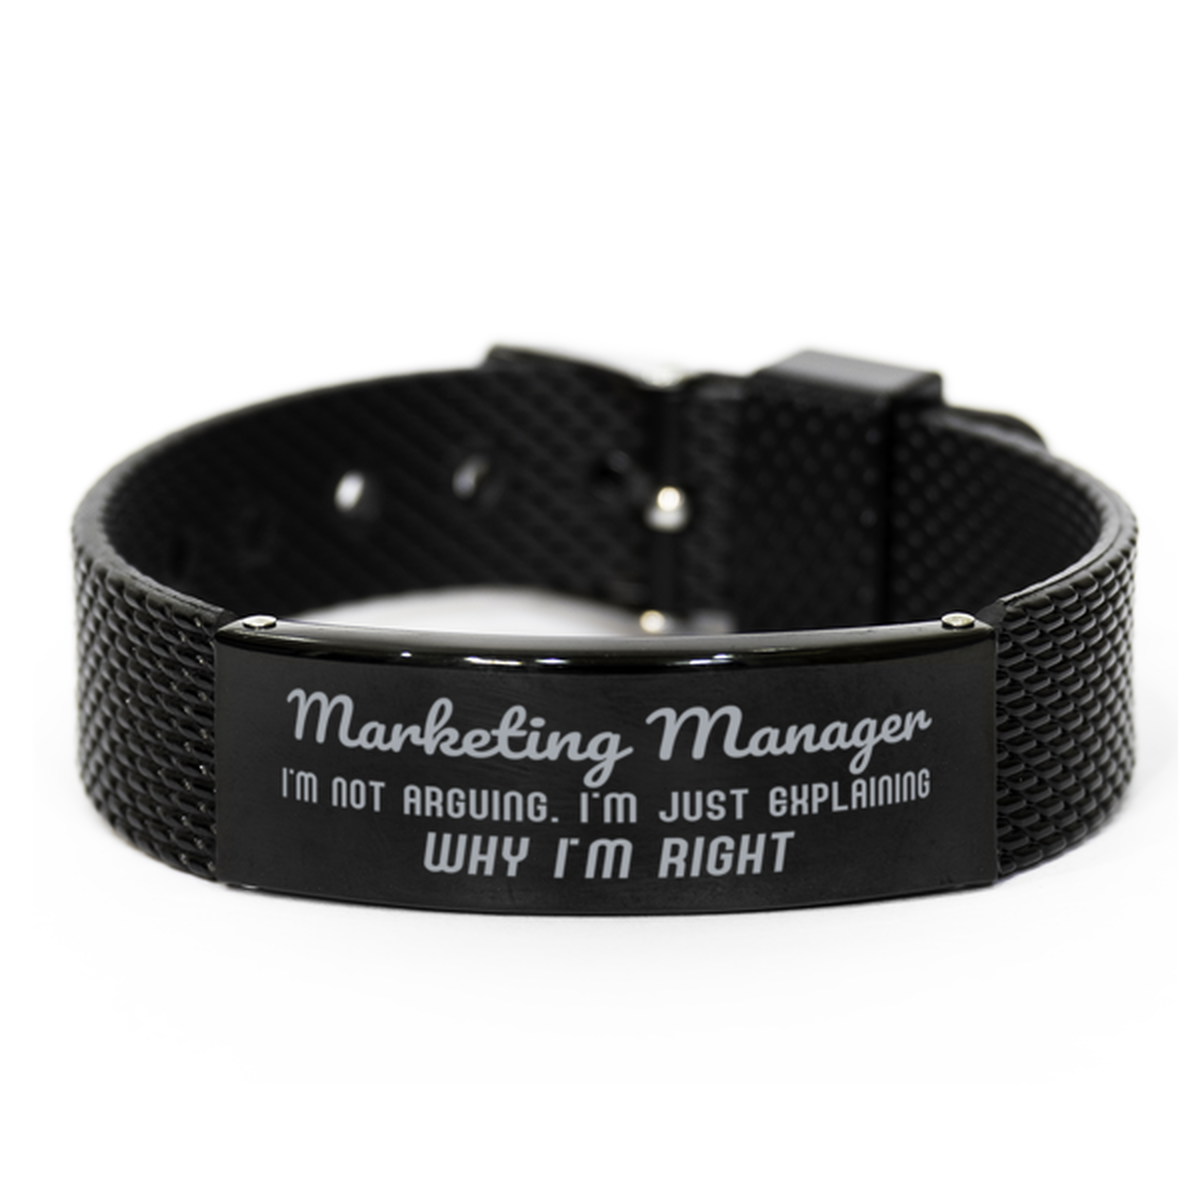 Marketing Manager I'm not Arguing. I'm Just Explaining Why I'm RIGHT Black Shark Mesh Bracelet, Funny Saying Quote Marketing Manager Gifts For Marketing Manager Graduation Birthday Christmas Gifts for Men Women Coworker